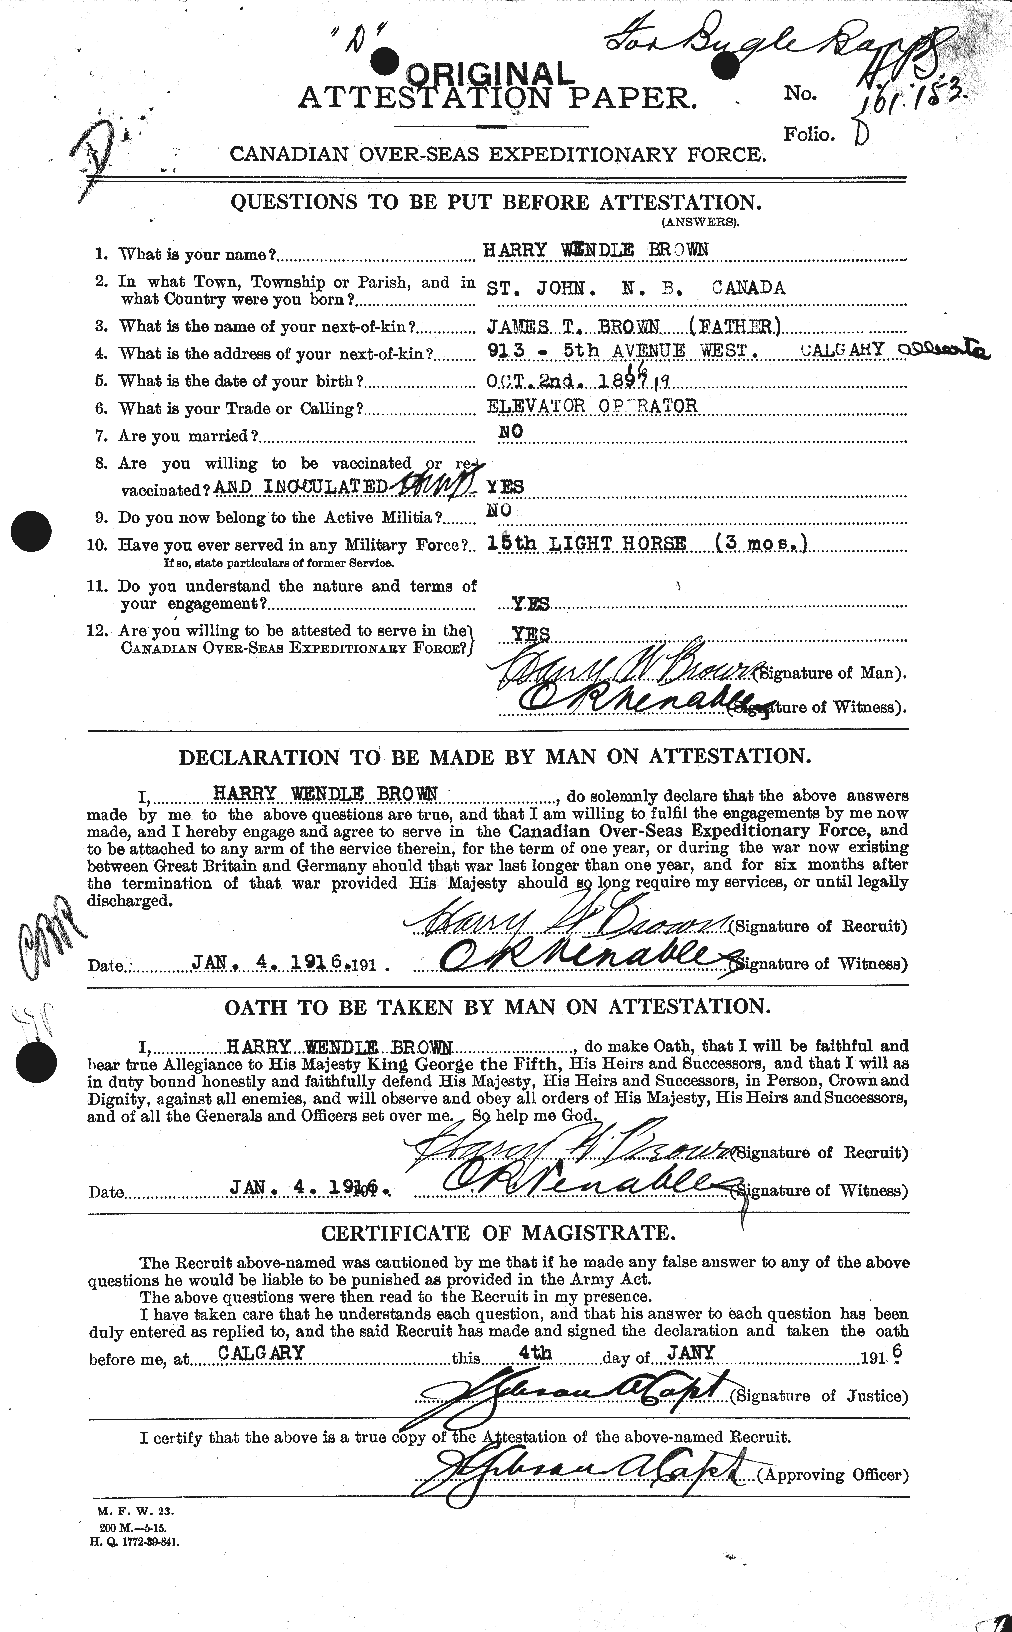 Personnel Records of the First World War - CEF 265480a